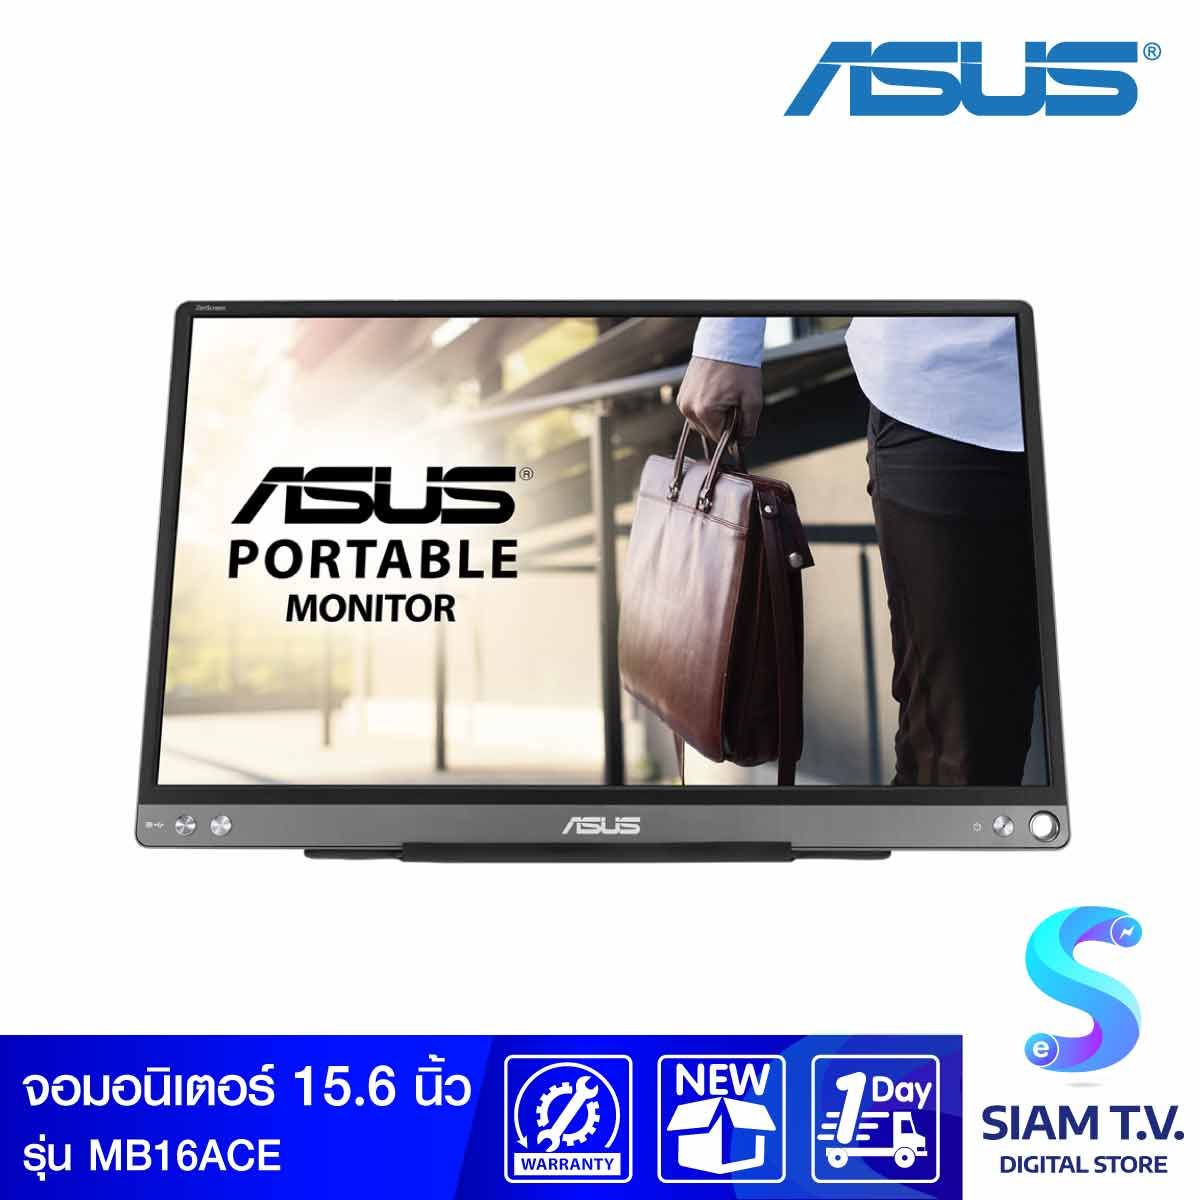 PORTABLE MONITOR (จอมอนิเตอร์พกพา) ASUS ZENSCREEN MB16ACE - 15.6" IPS FHD 60Hz USB-C